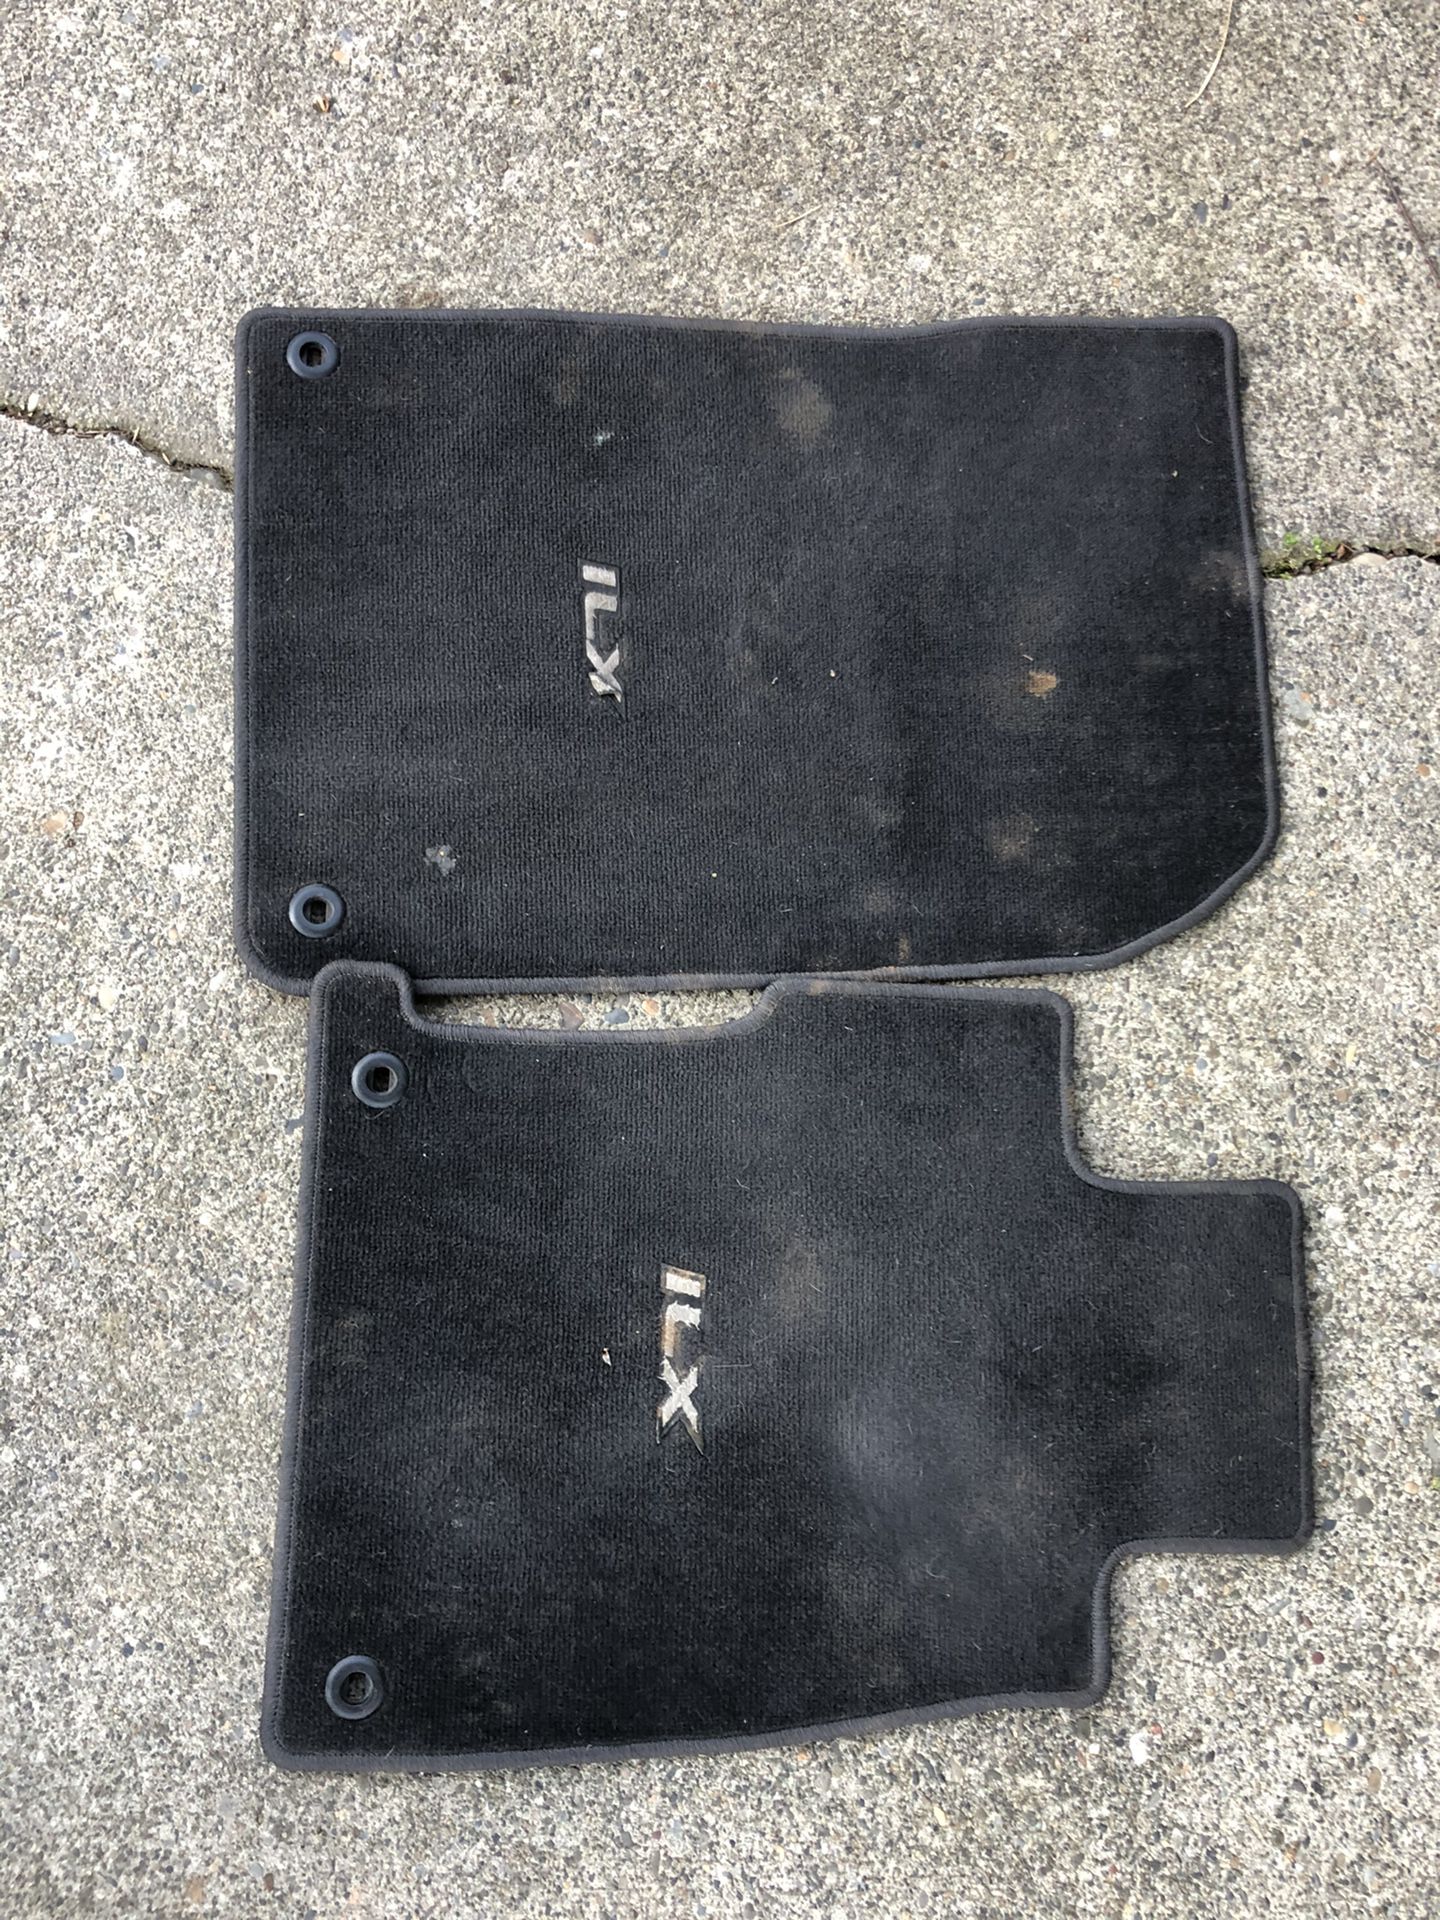 Free ILX front floor mats